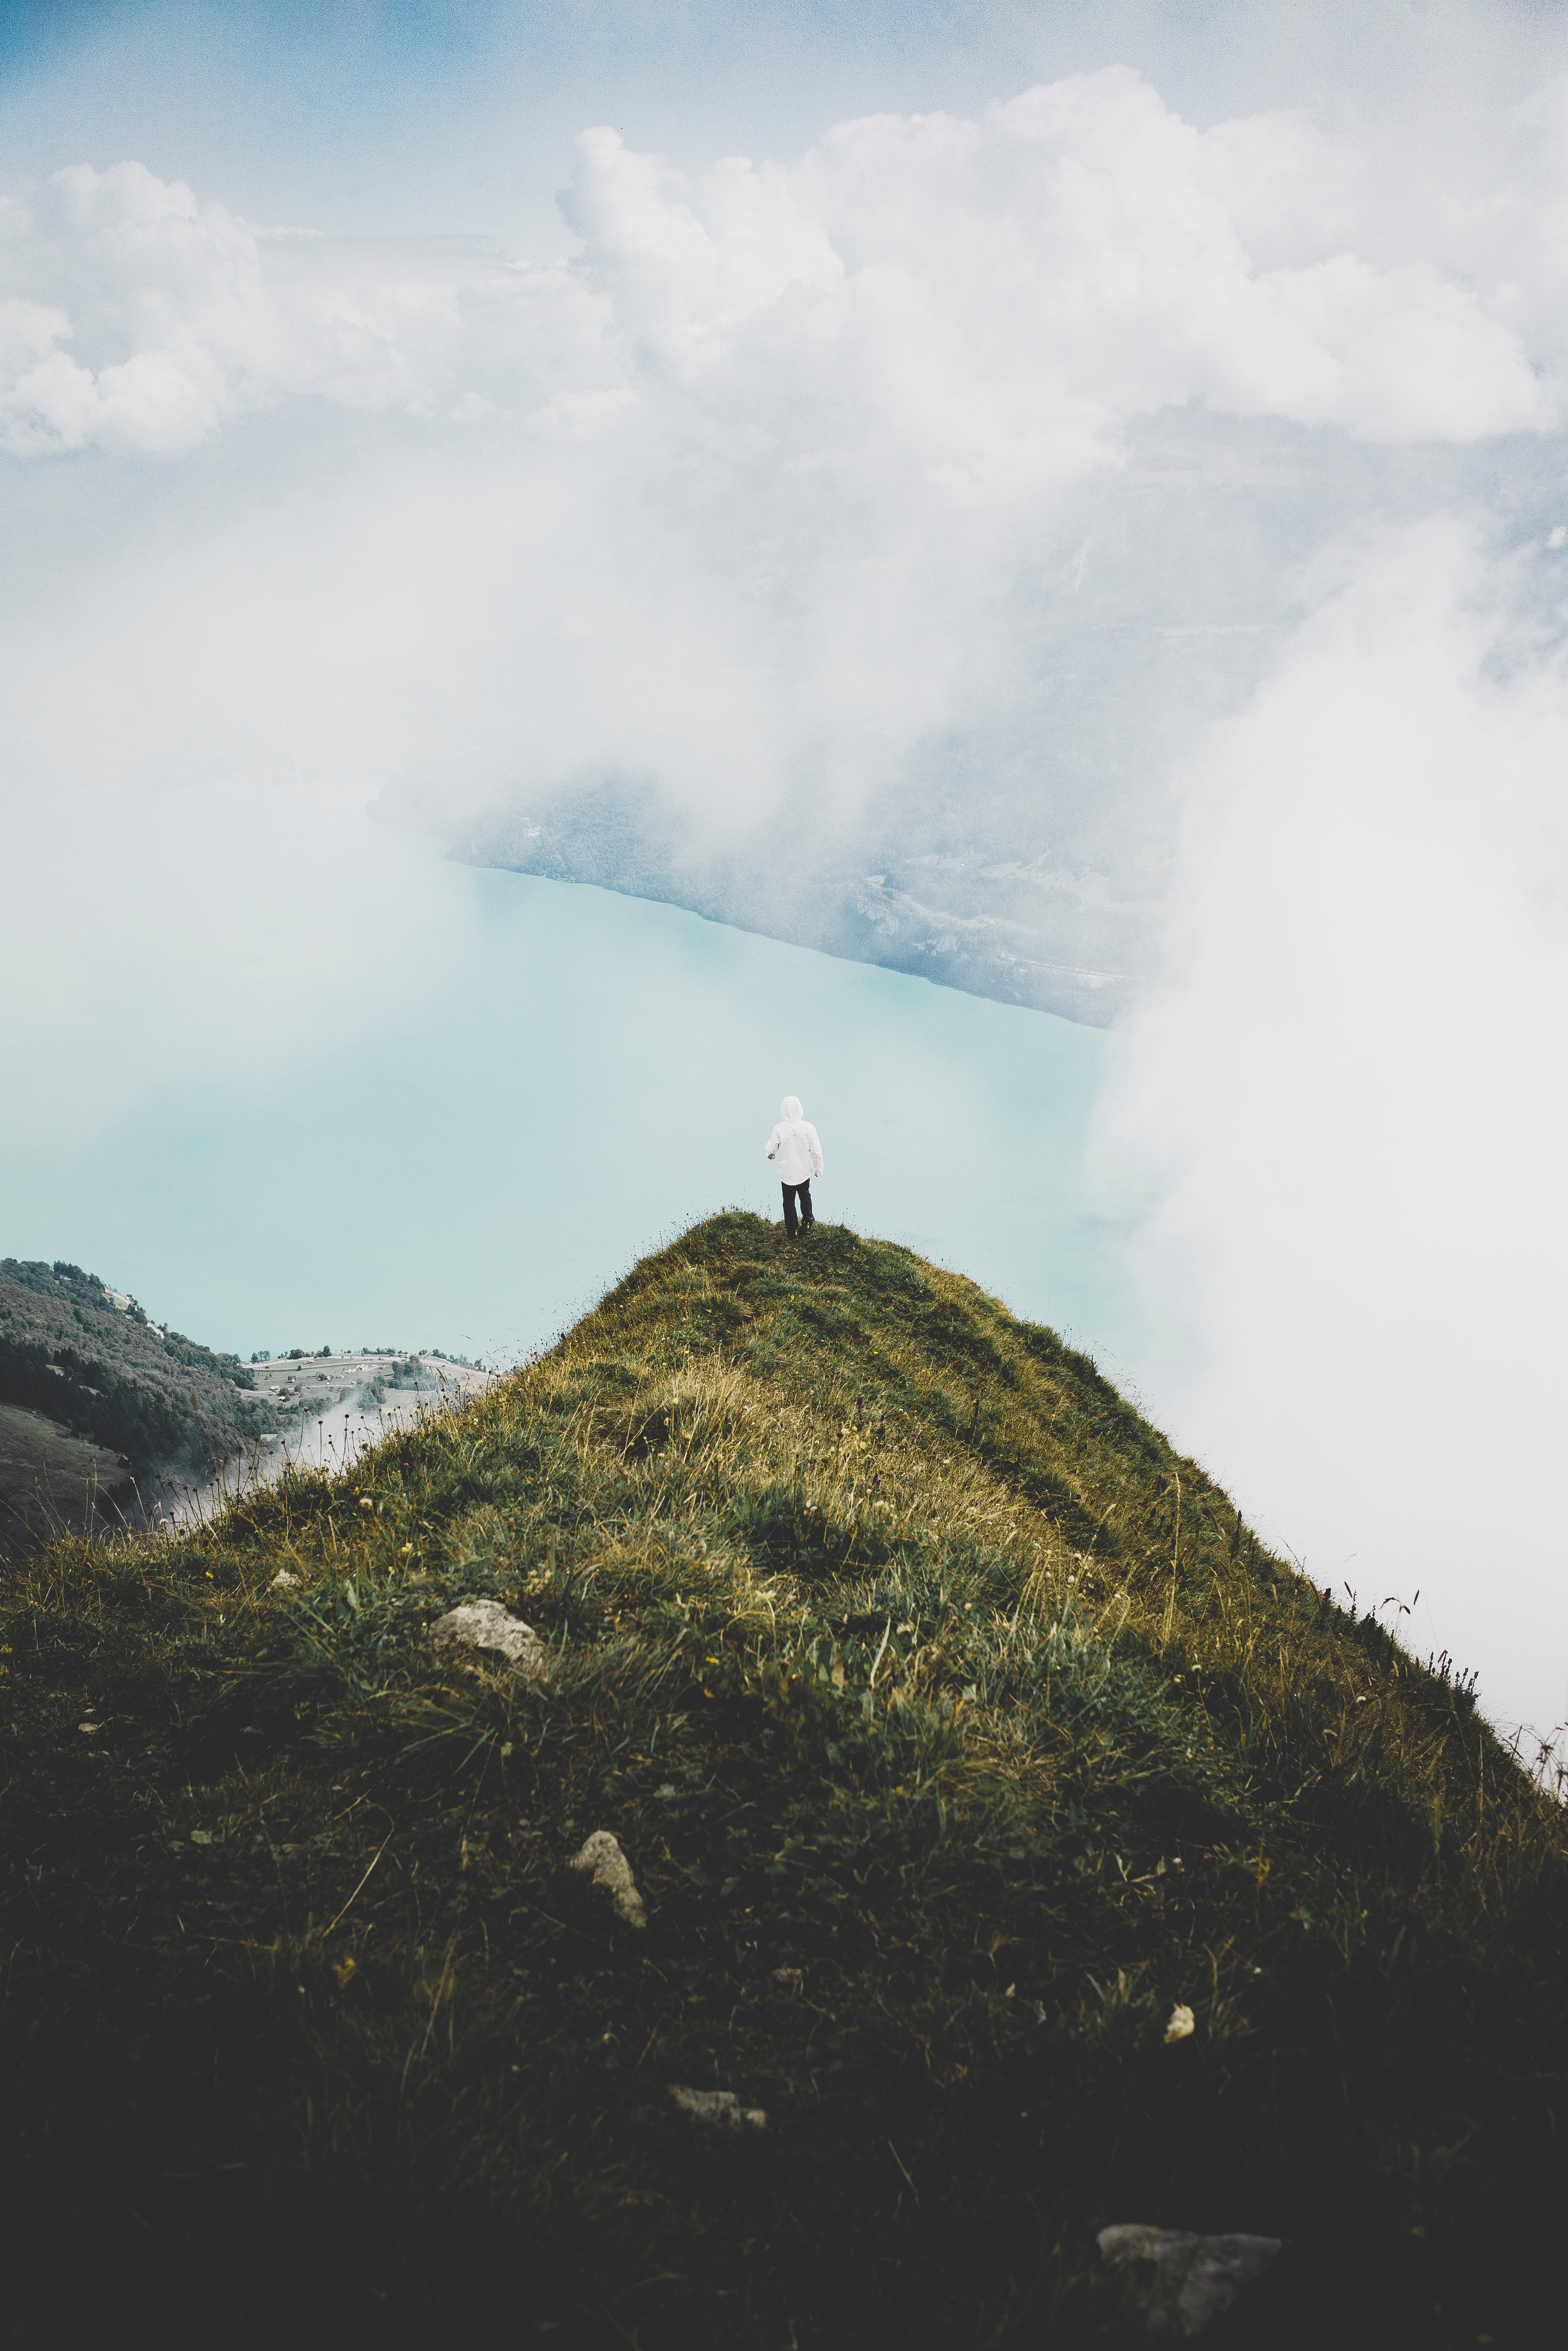 New Lock Screen Wallpapers nature, clouds, mountain, vertex, top, privacy, seclusion, human, person, loneliness, alone, lonely